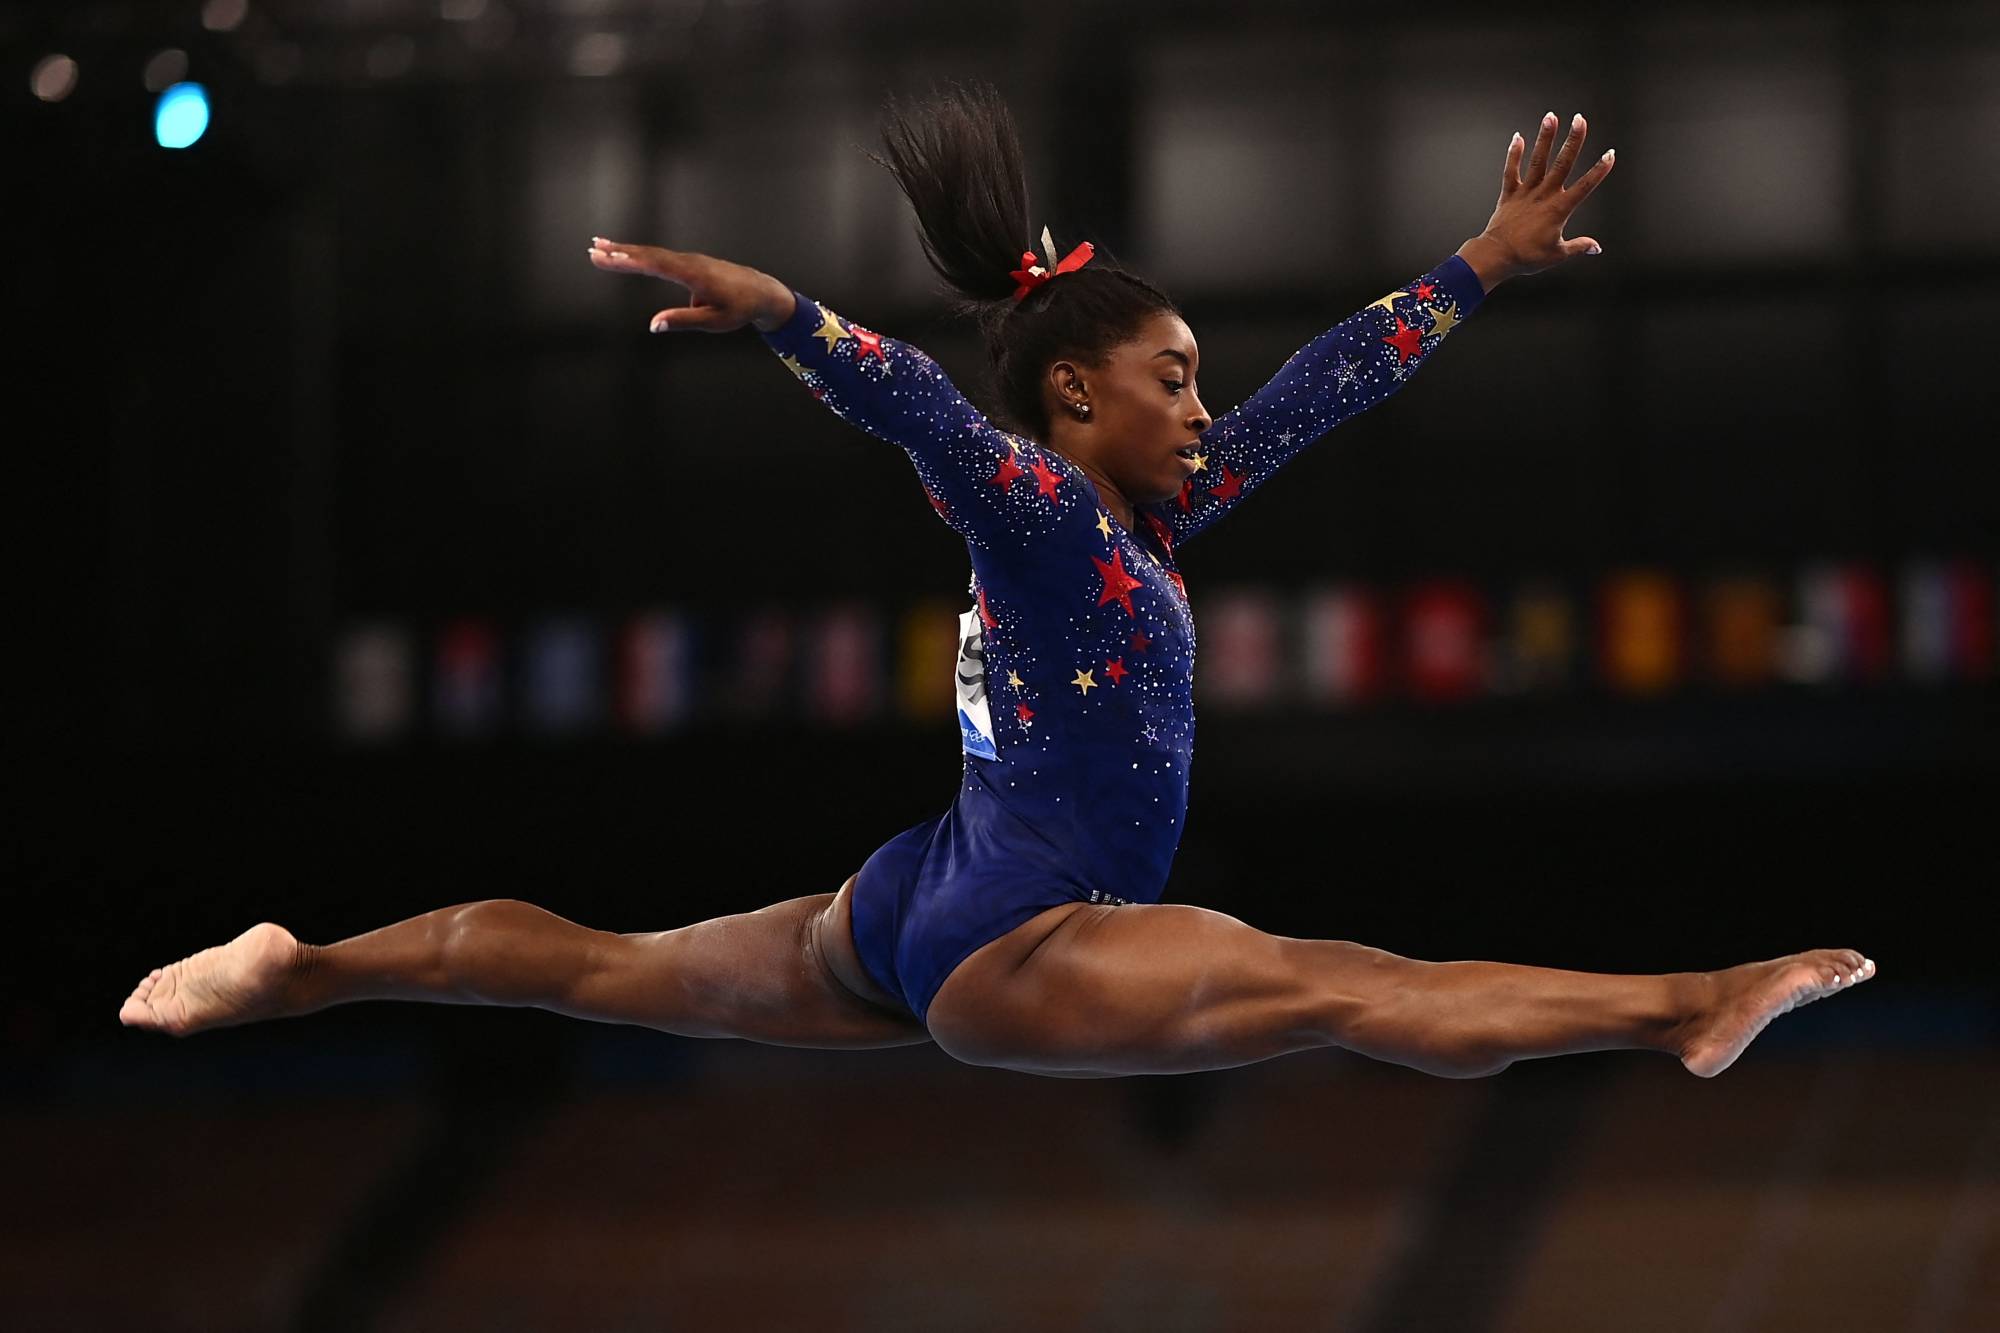 Star gymnast Simone Biles may return to competition in August